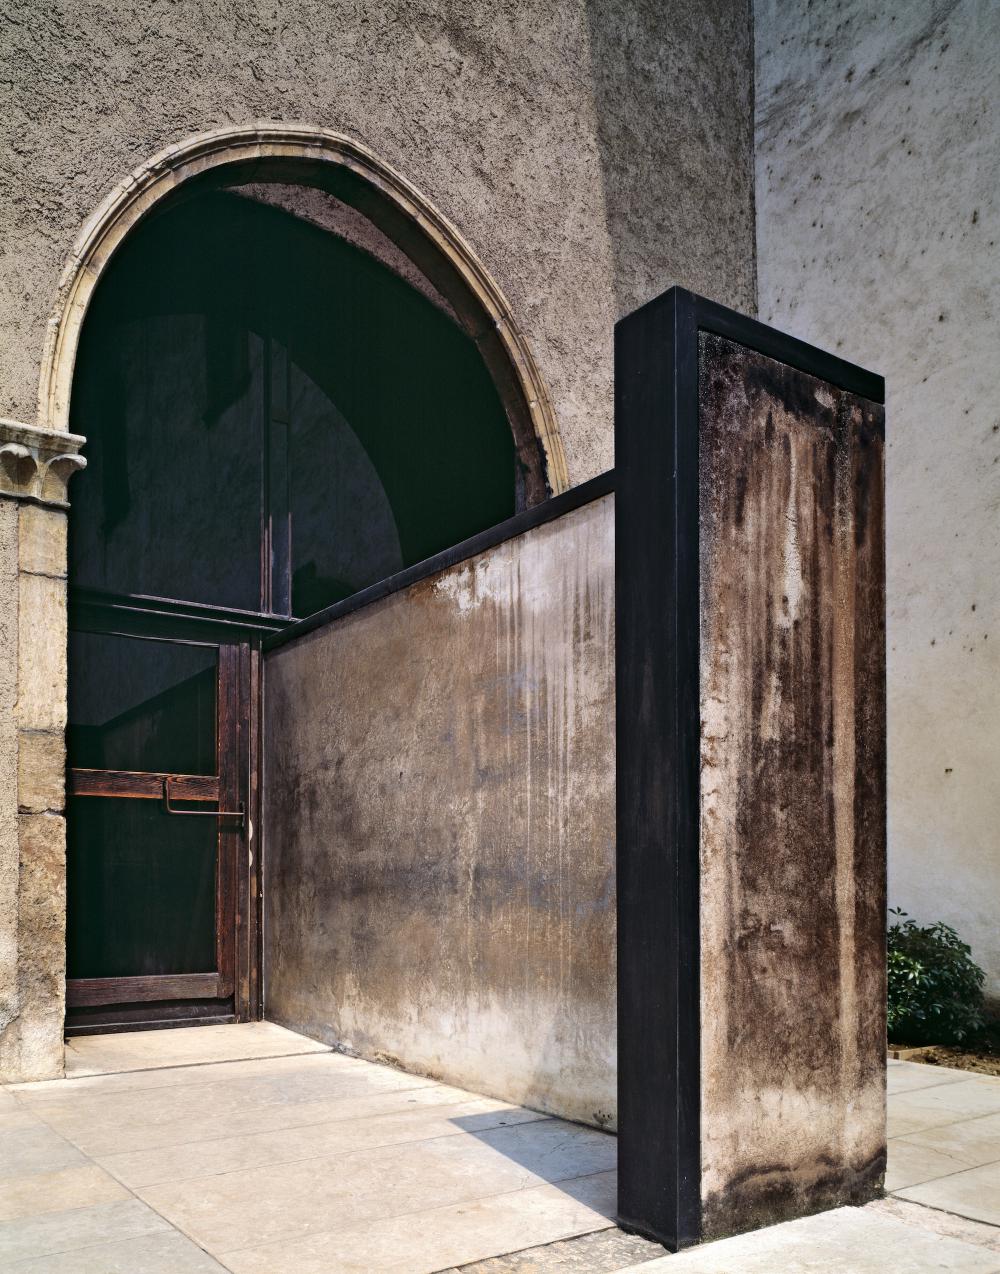 Castelvecchio Museum renovations, Verona, 1957-75, entrance arch with deeply recessed glazed door and projecting L-shaped wall (picture: © Klaus Frahm/ARTUR IMAGES)